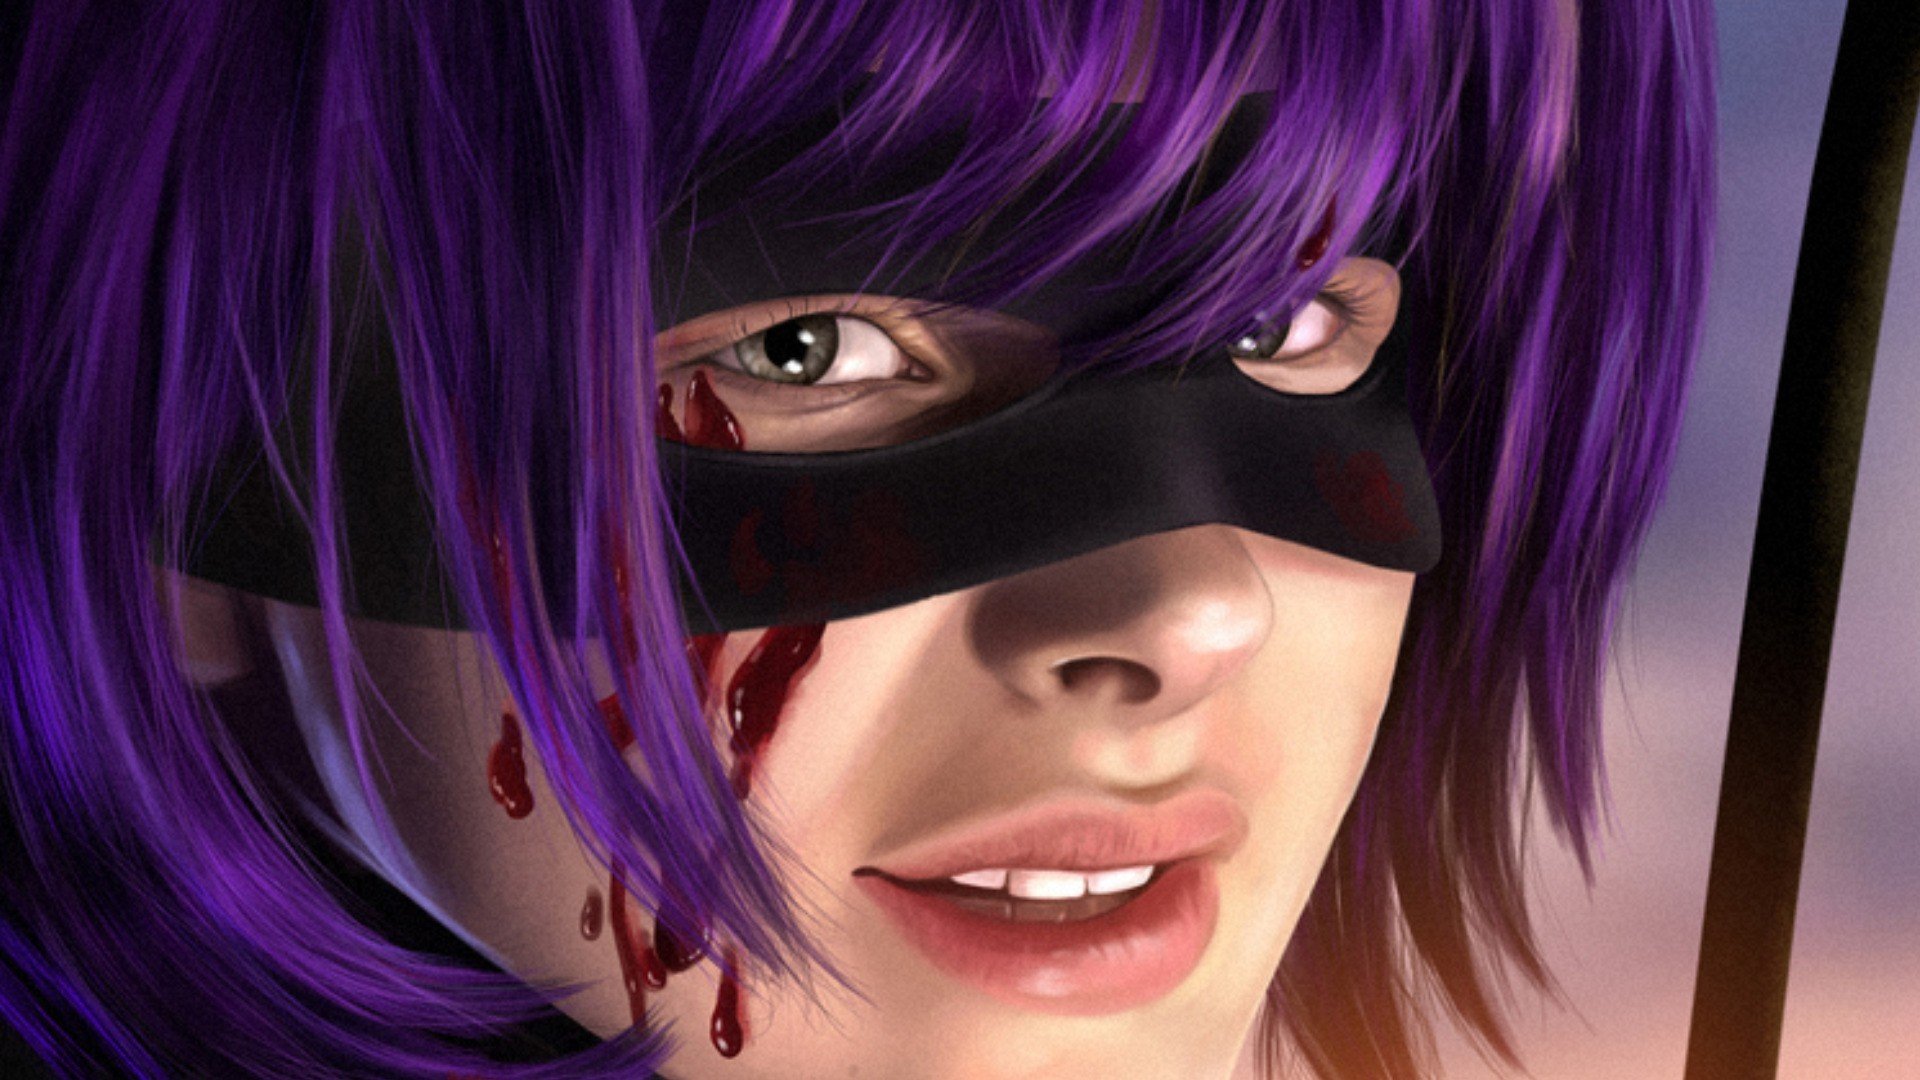 Kick Ass Hit Girl Hd Wallpapers Desktop And Mobile Images And Photos